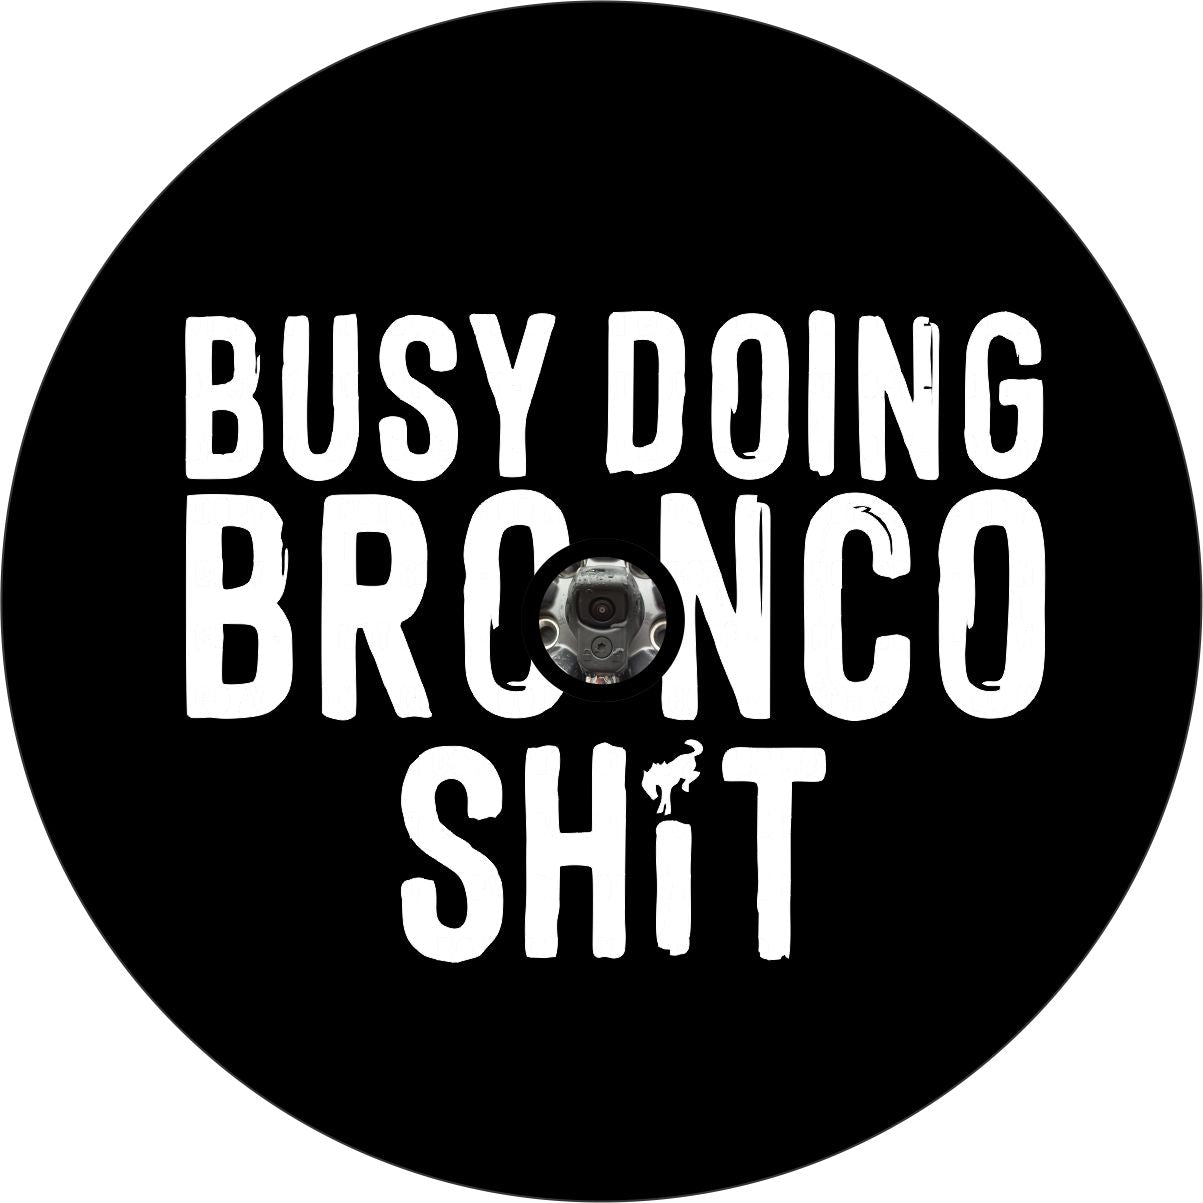 Black vinyl spare tire cover that boldy says "busy doing Bronco shit" and the dot in the I is a Bronco horse icon plus a place for a back up camera.